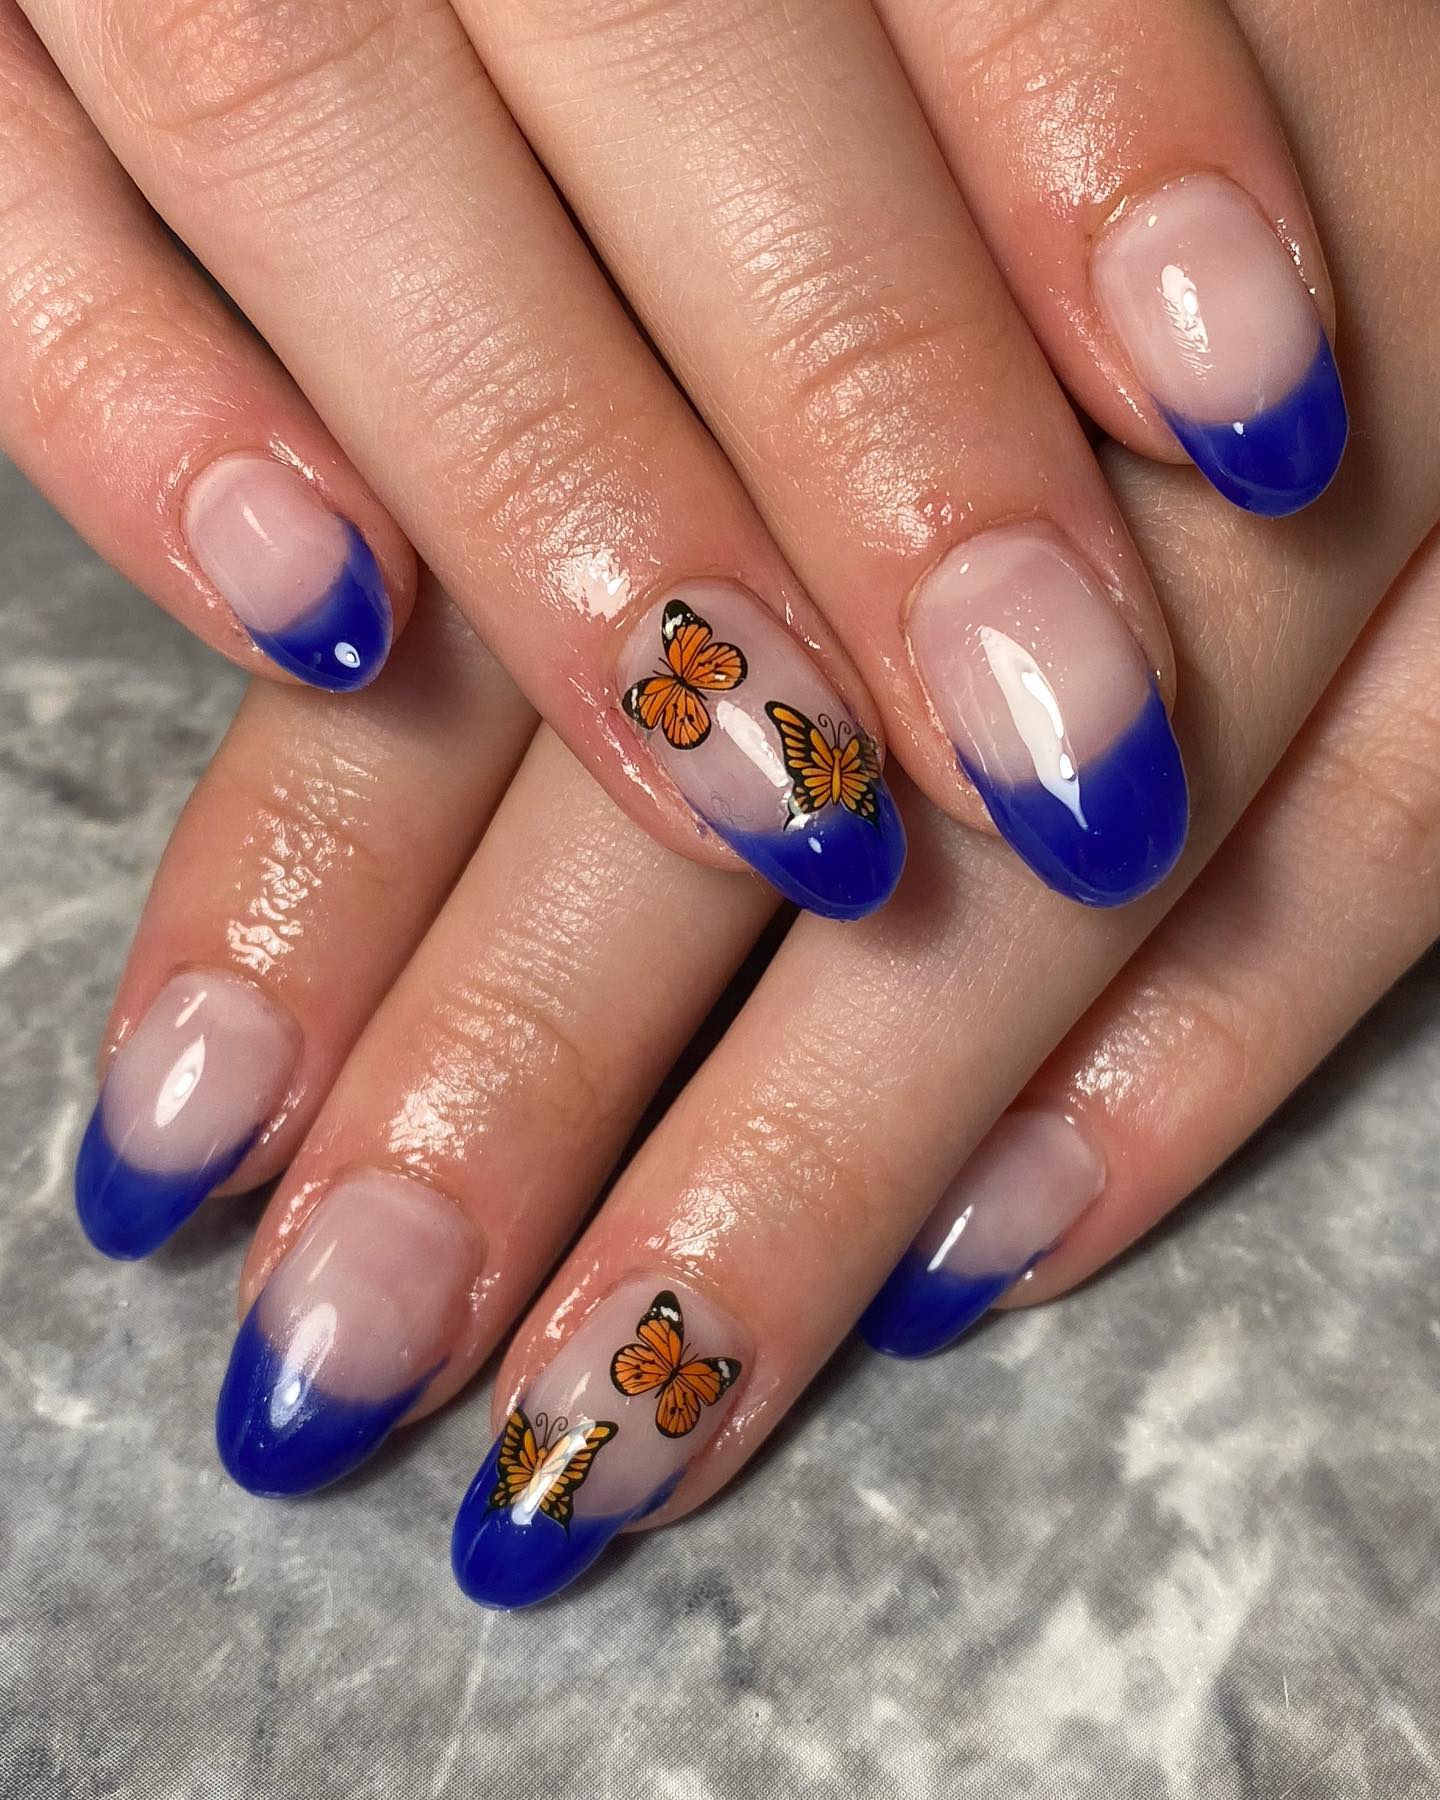  Neutral and white french manicure are classic but why not taking it to a new level? Use dark blue nail polish and some orange butterfly stickers.